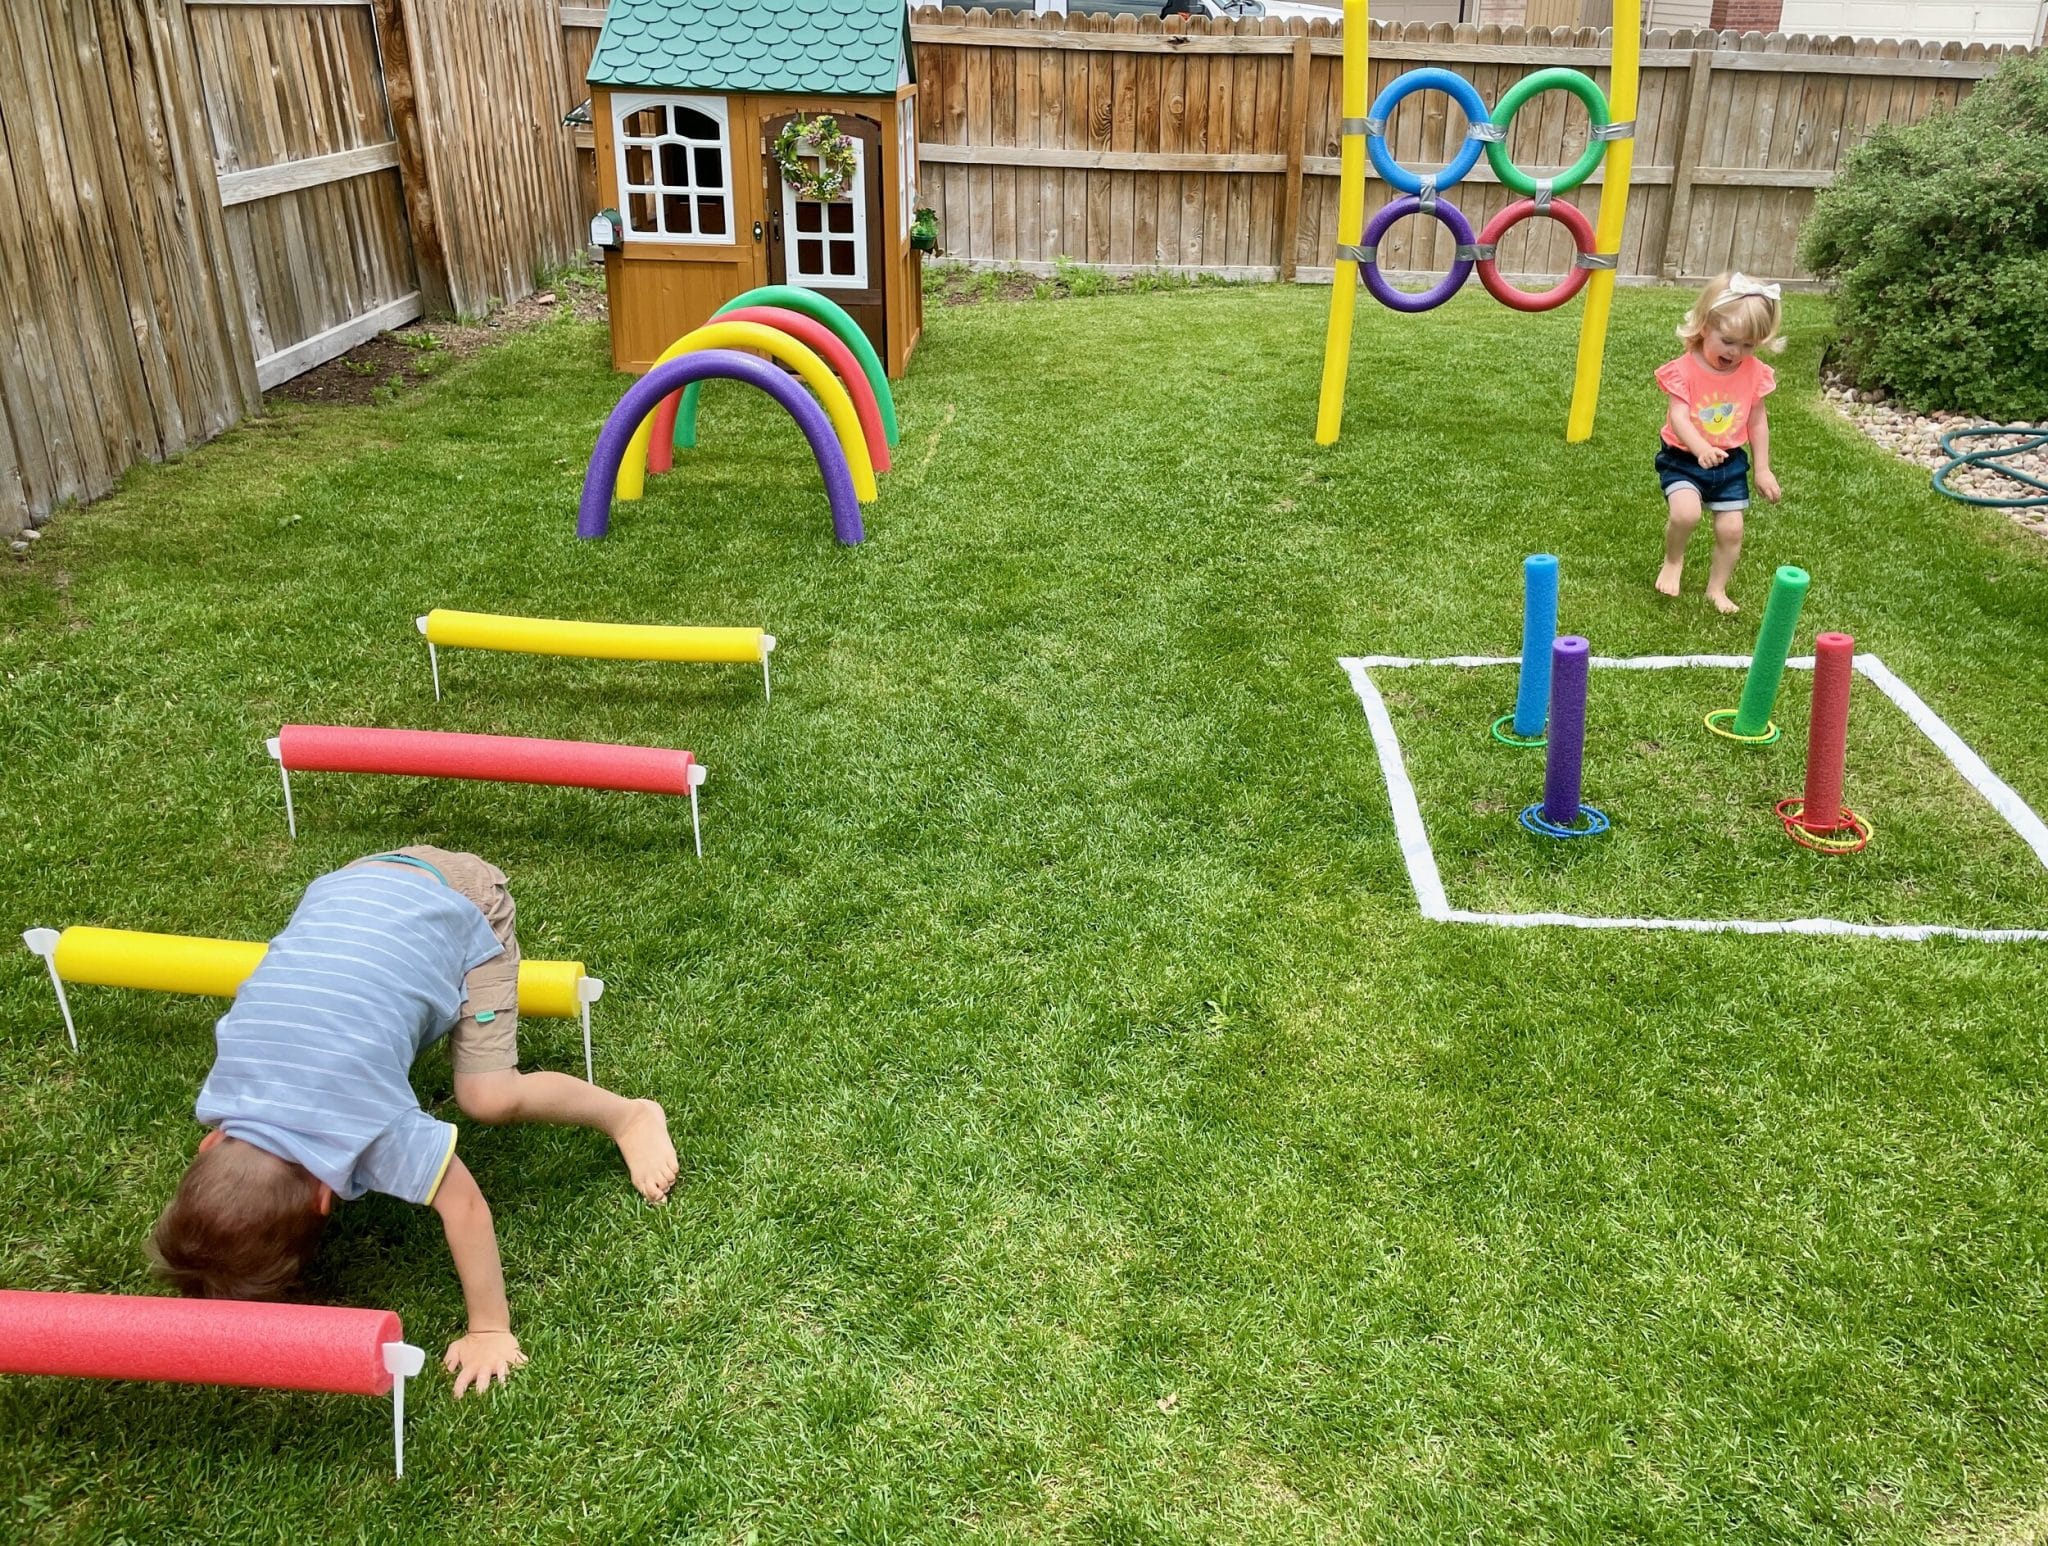 A child joyfully playing on a wooden play set in a backyard, enjoying an obstacle course adventure